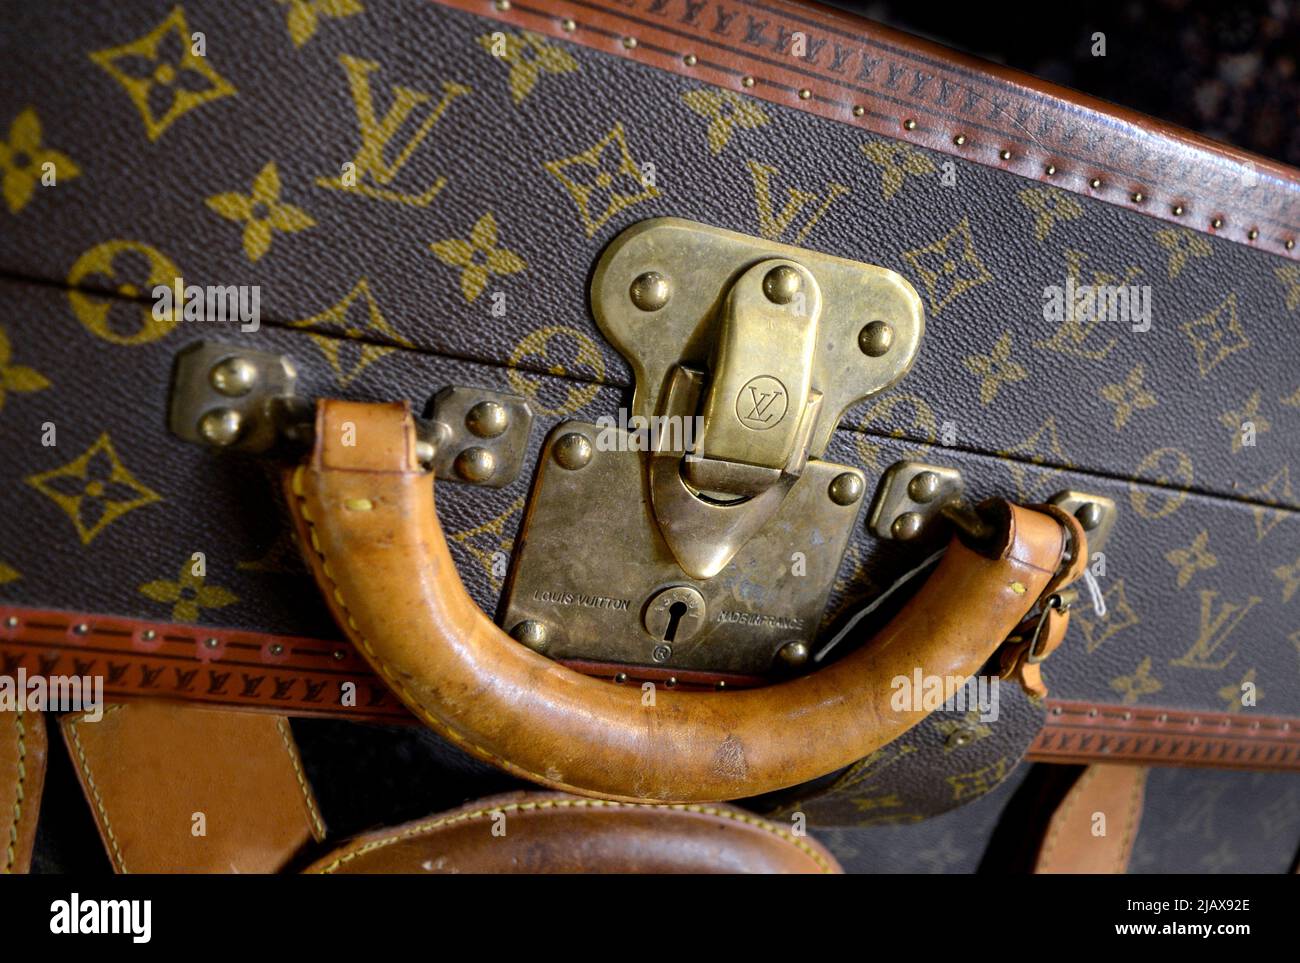 Louis Vuitton releases amazing pictures of their iconic luggage in the  1920s and 1930s